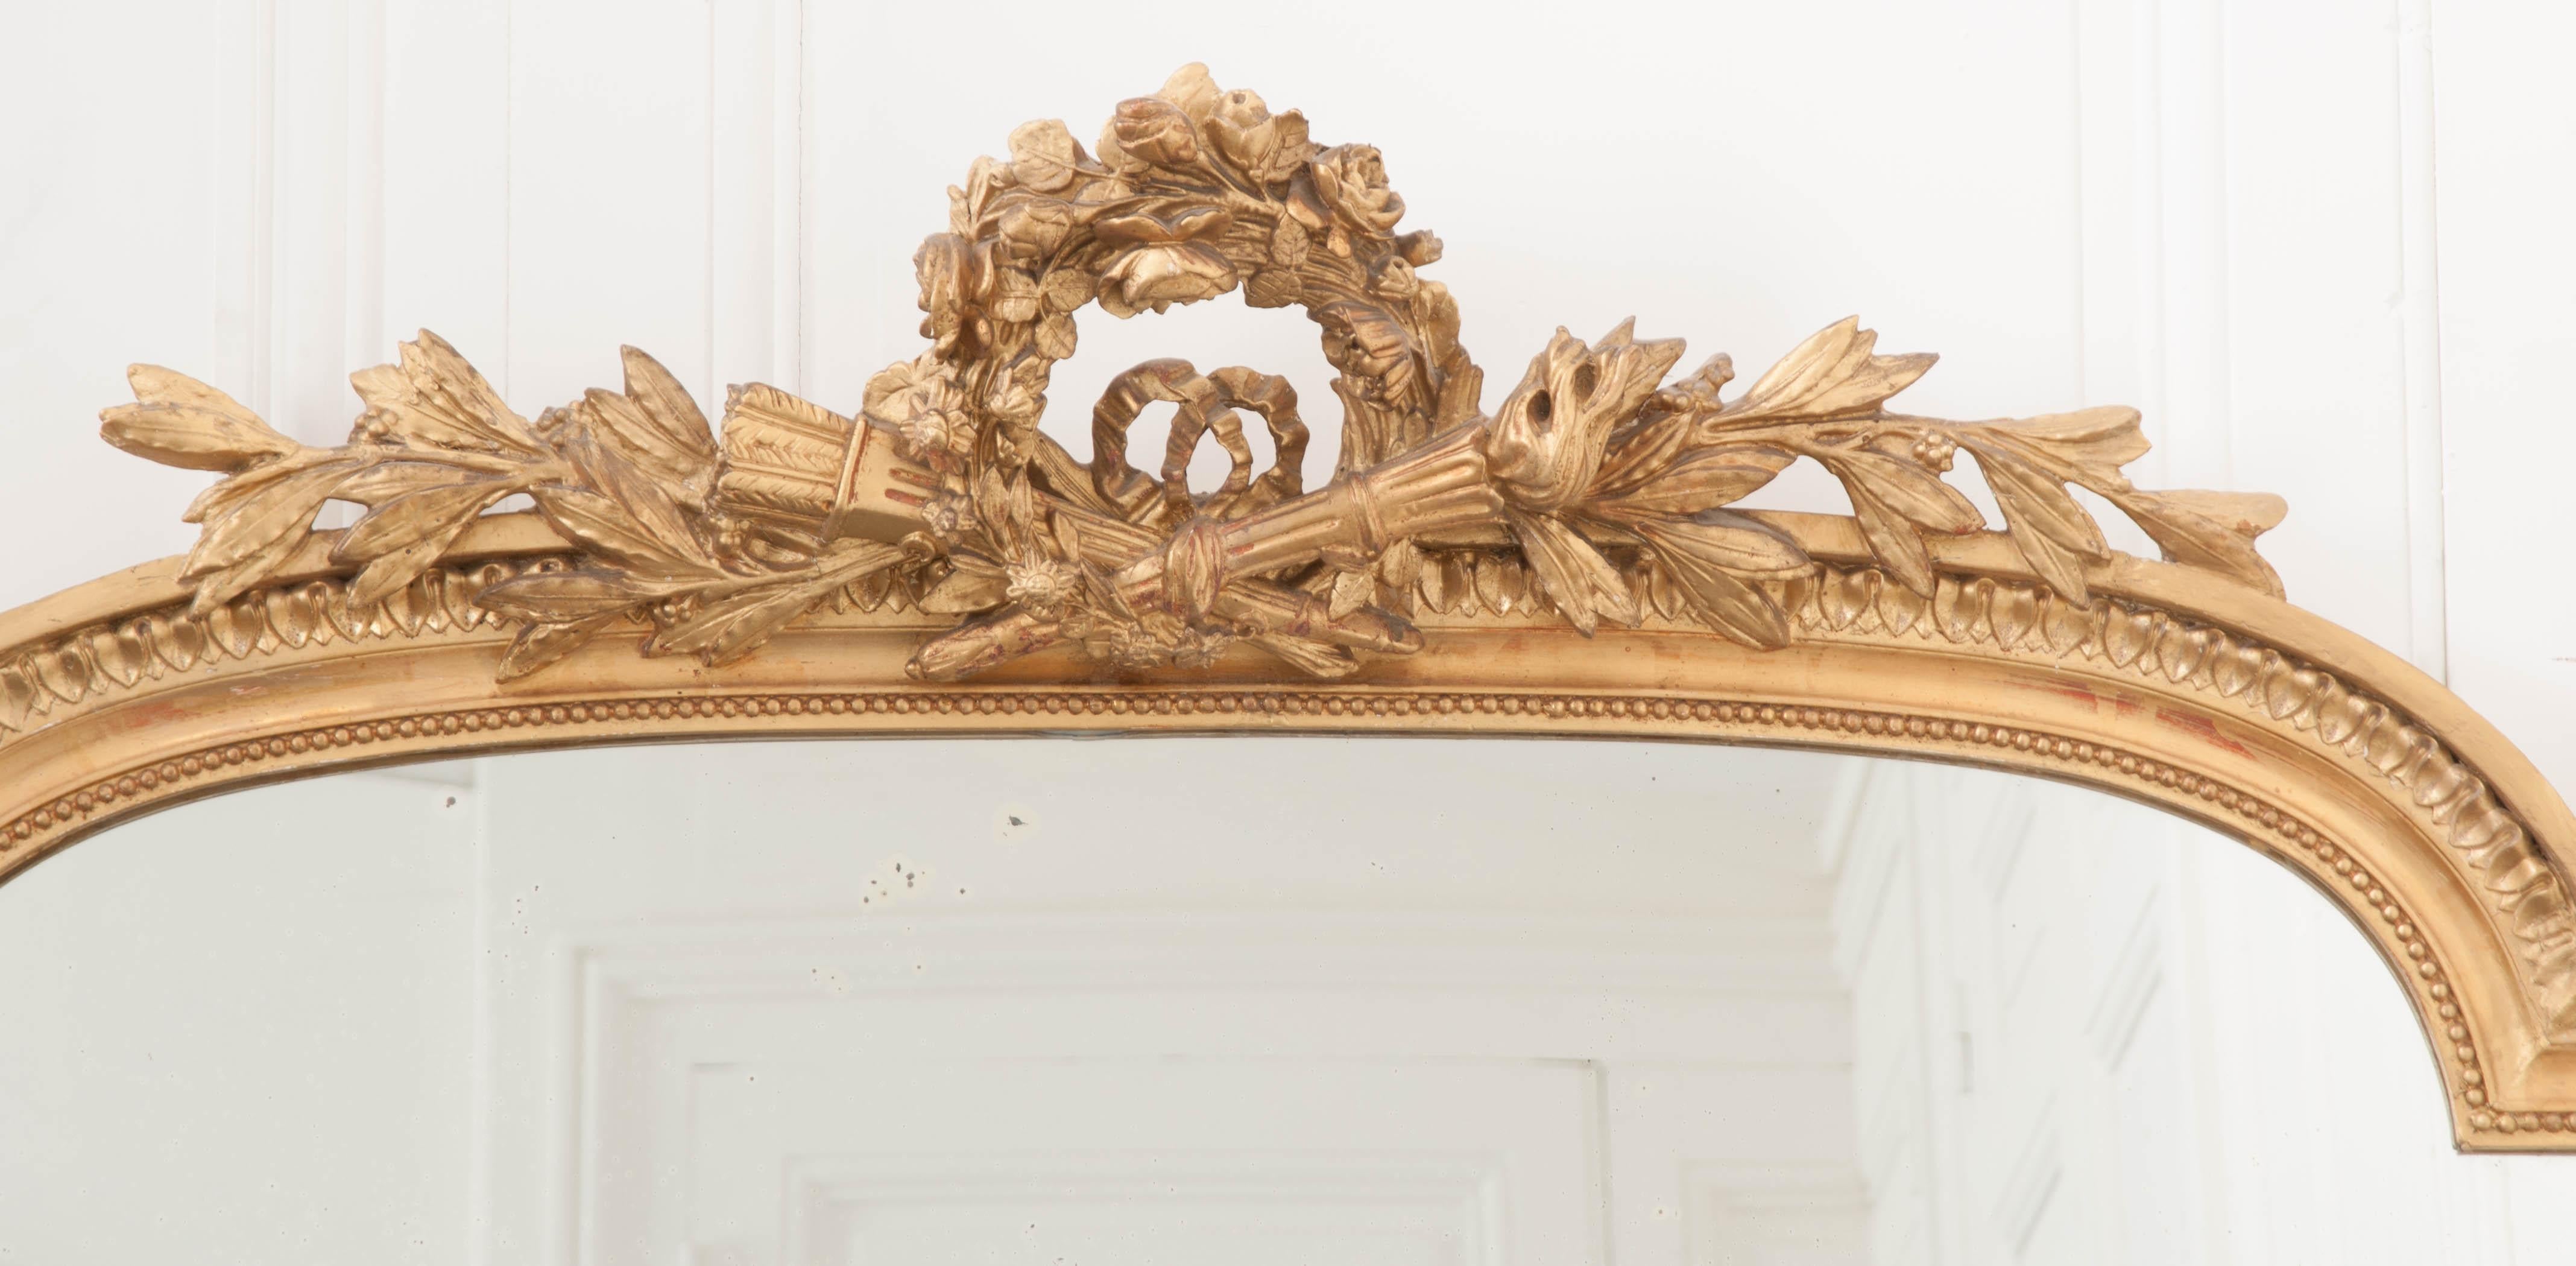 A spectacular gold gilt mirror from 19th century France. An impressive crest rests atop the mirror’s shaped top rail. This crest is composed of a wreath of roses set behind a crossed torch and quiver of arrows. A knotted bow can be seen in the